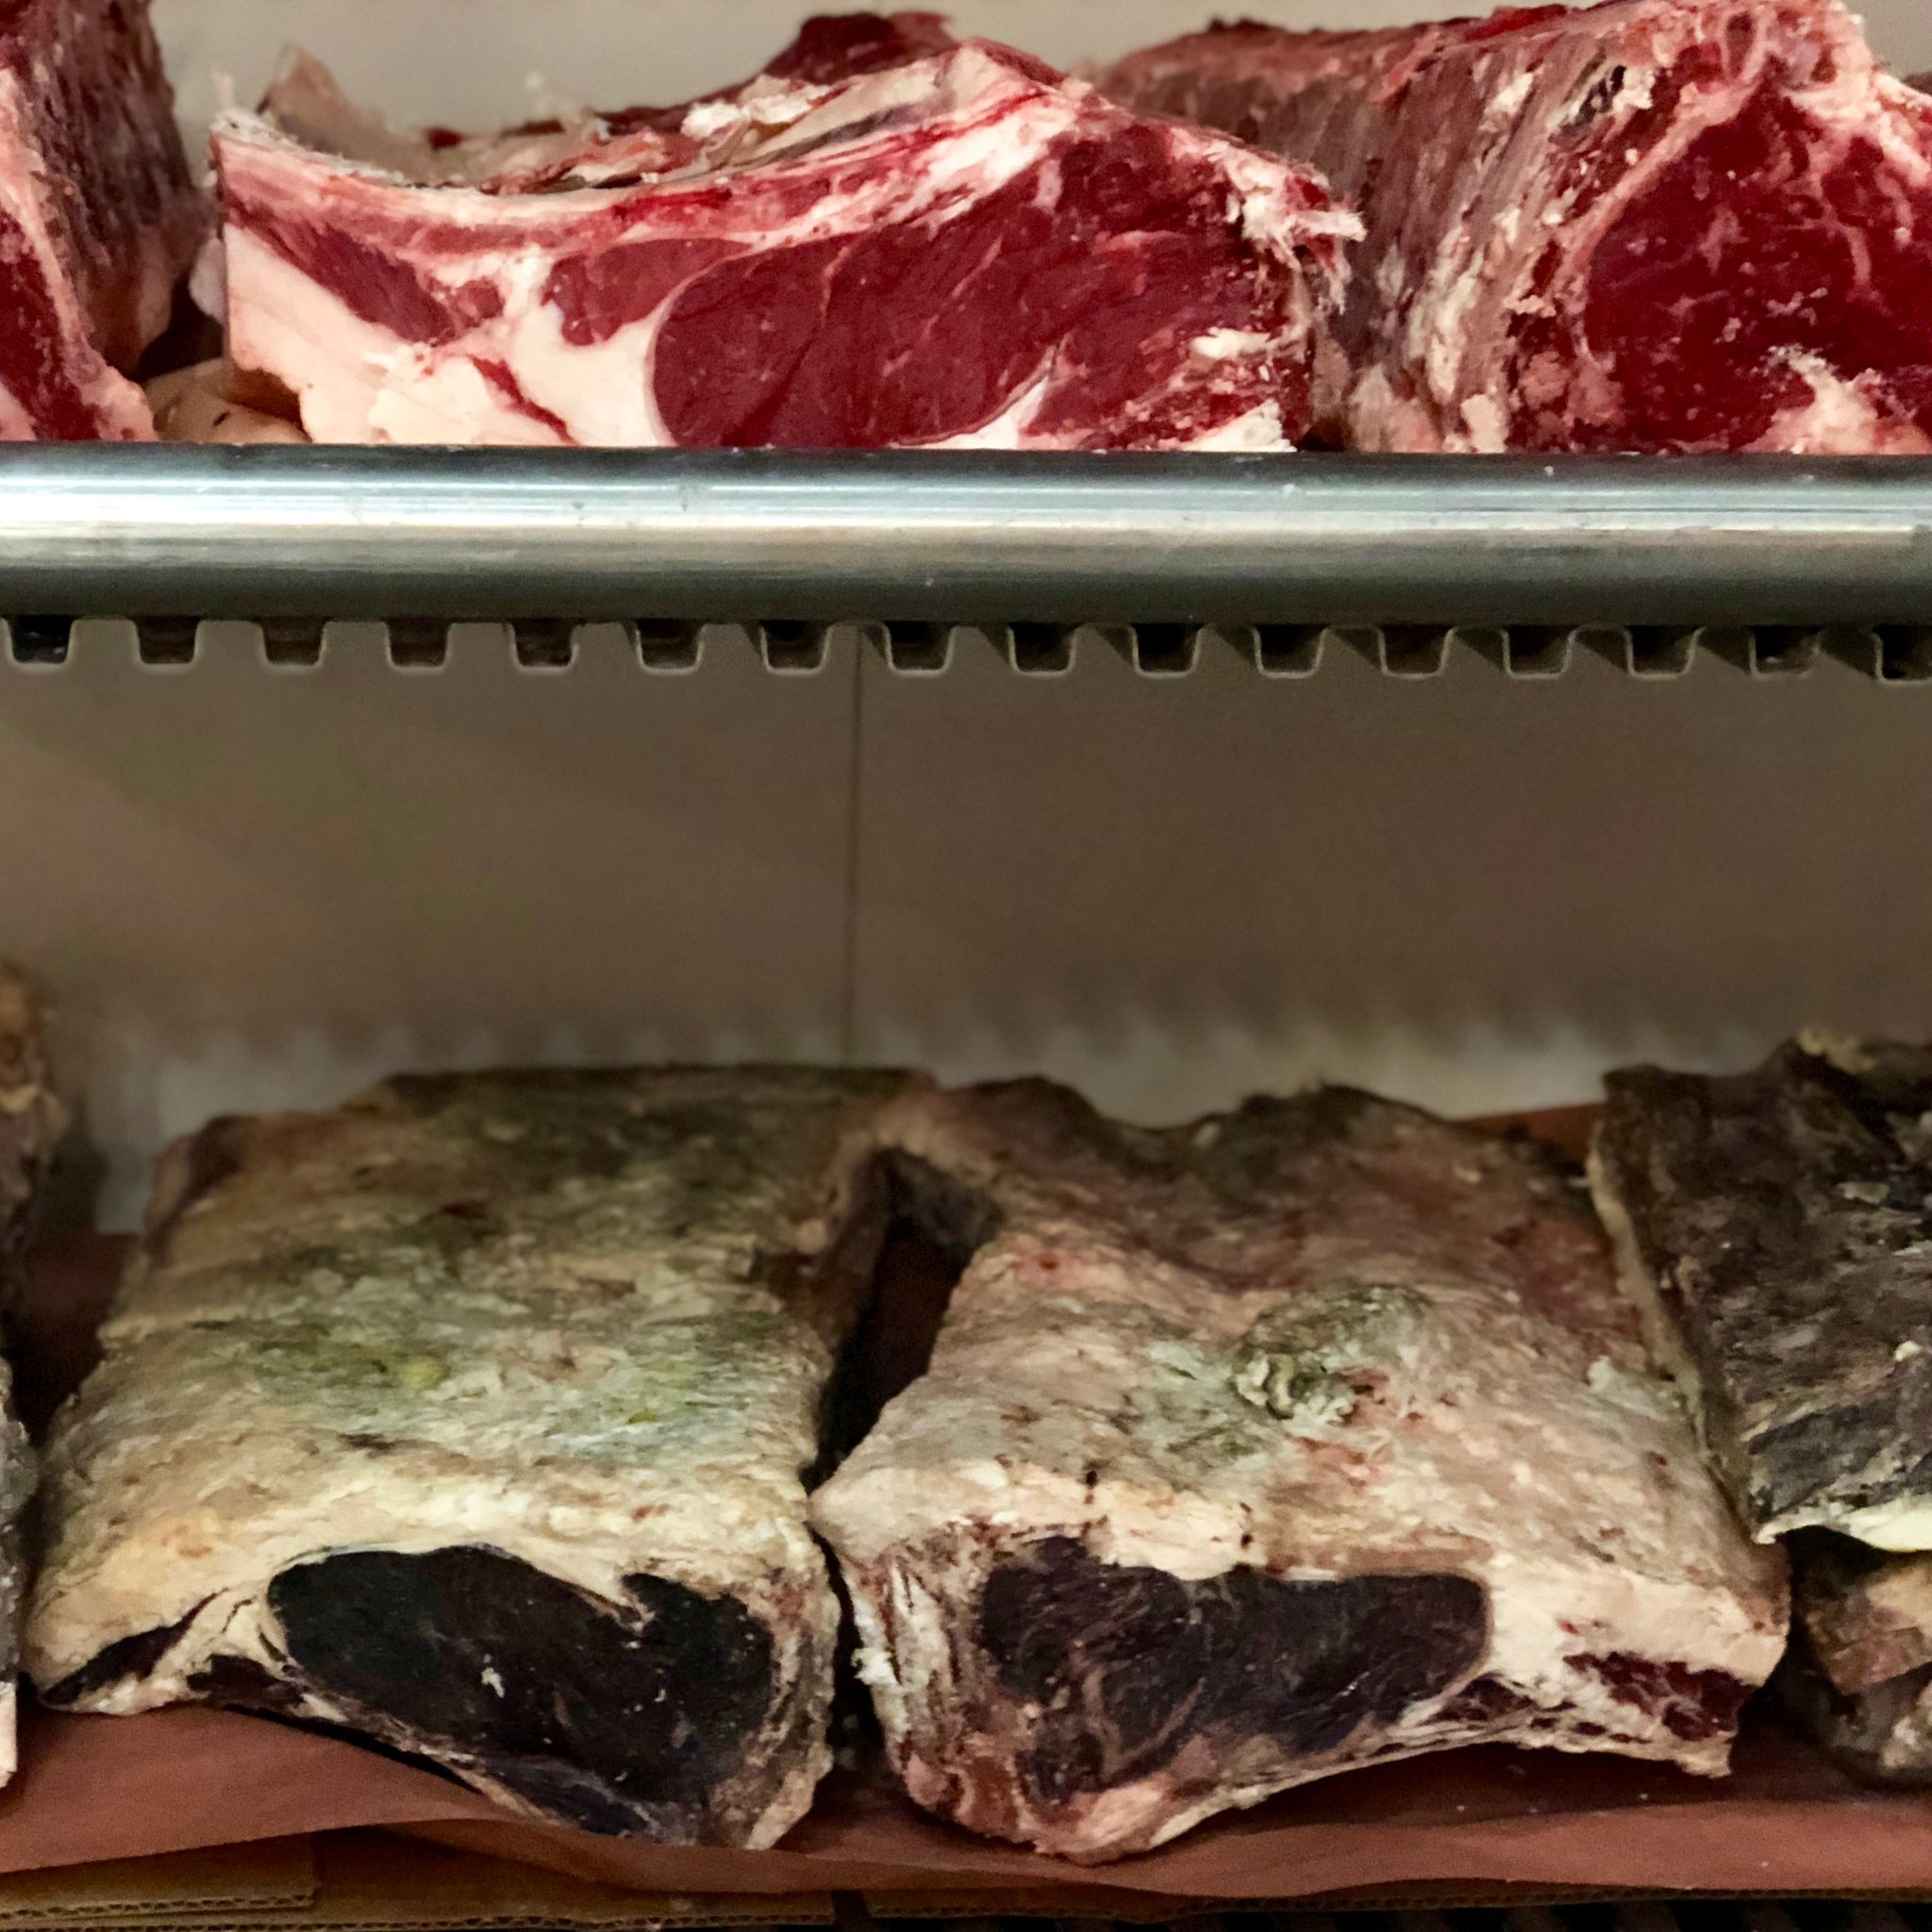 Dry Aging at The Organic Butcher - The Organic Butcher of McLean